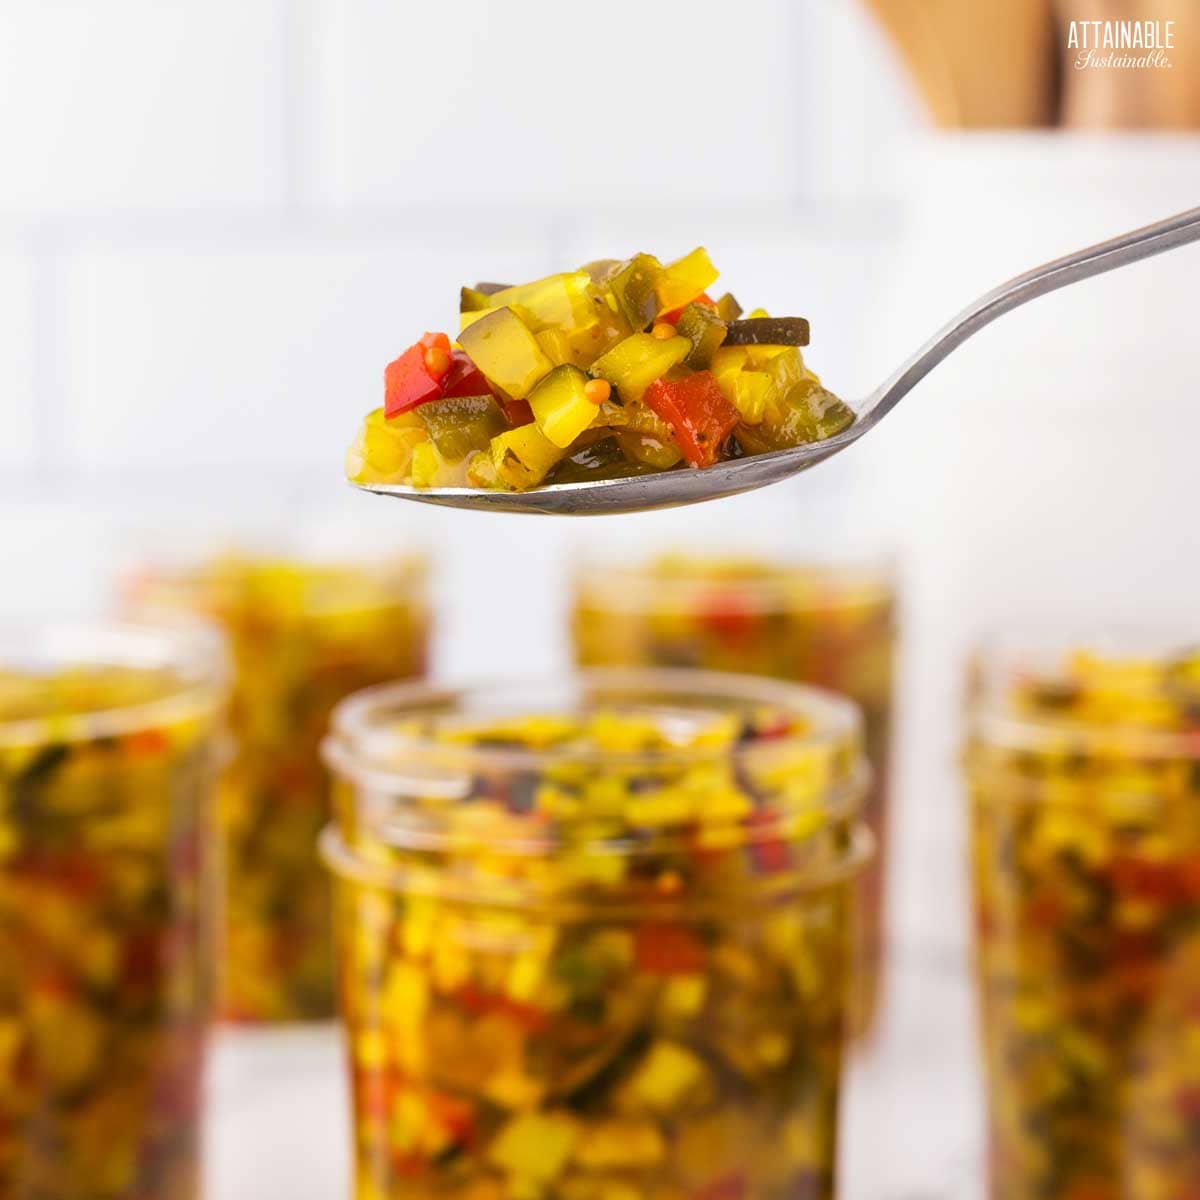 spoonful of zucchini relish, jars in background.